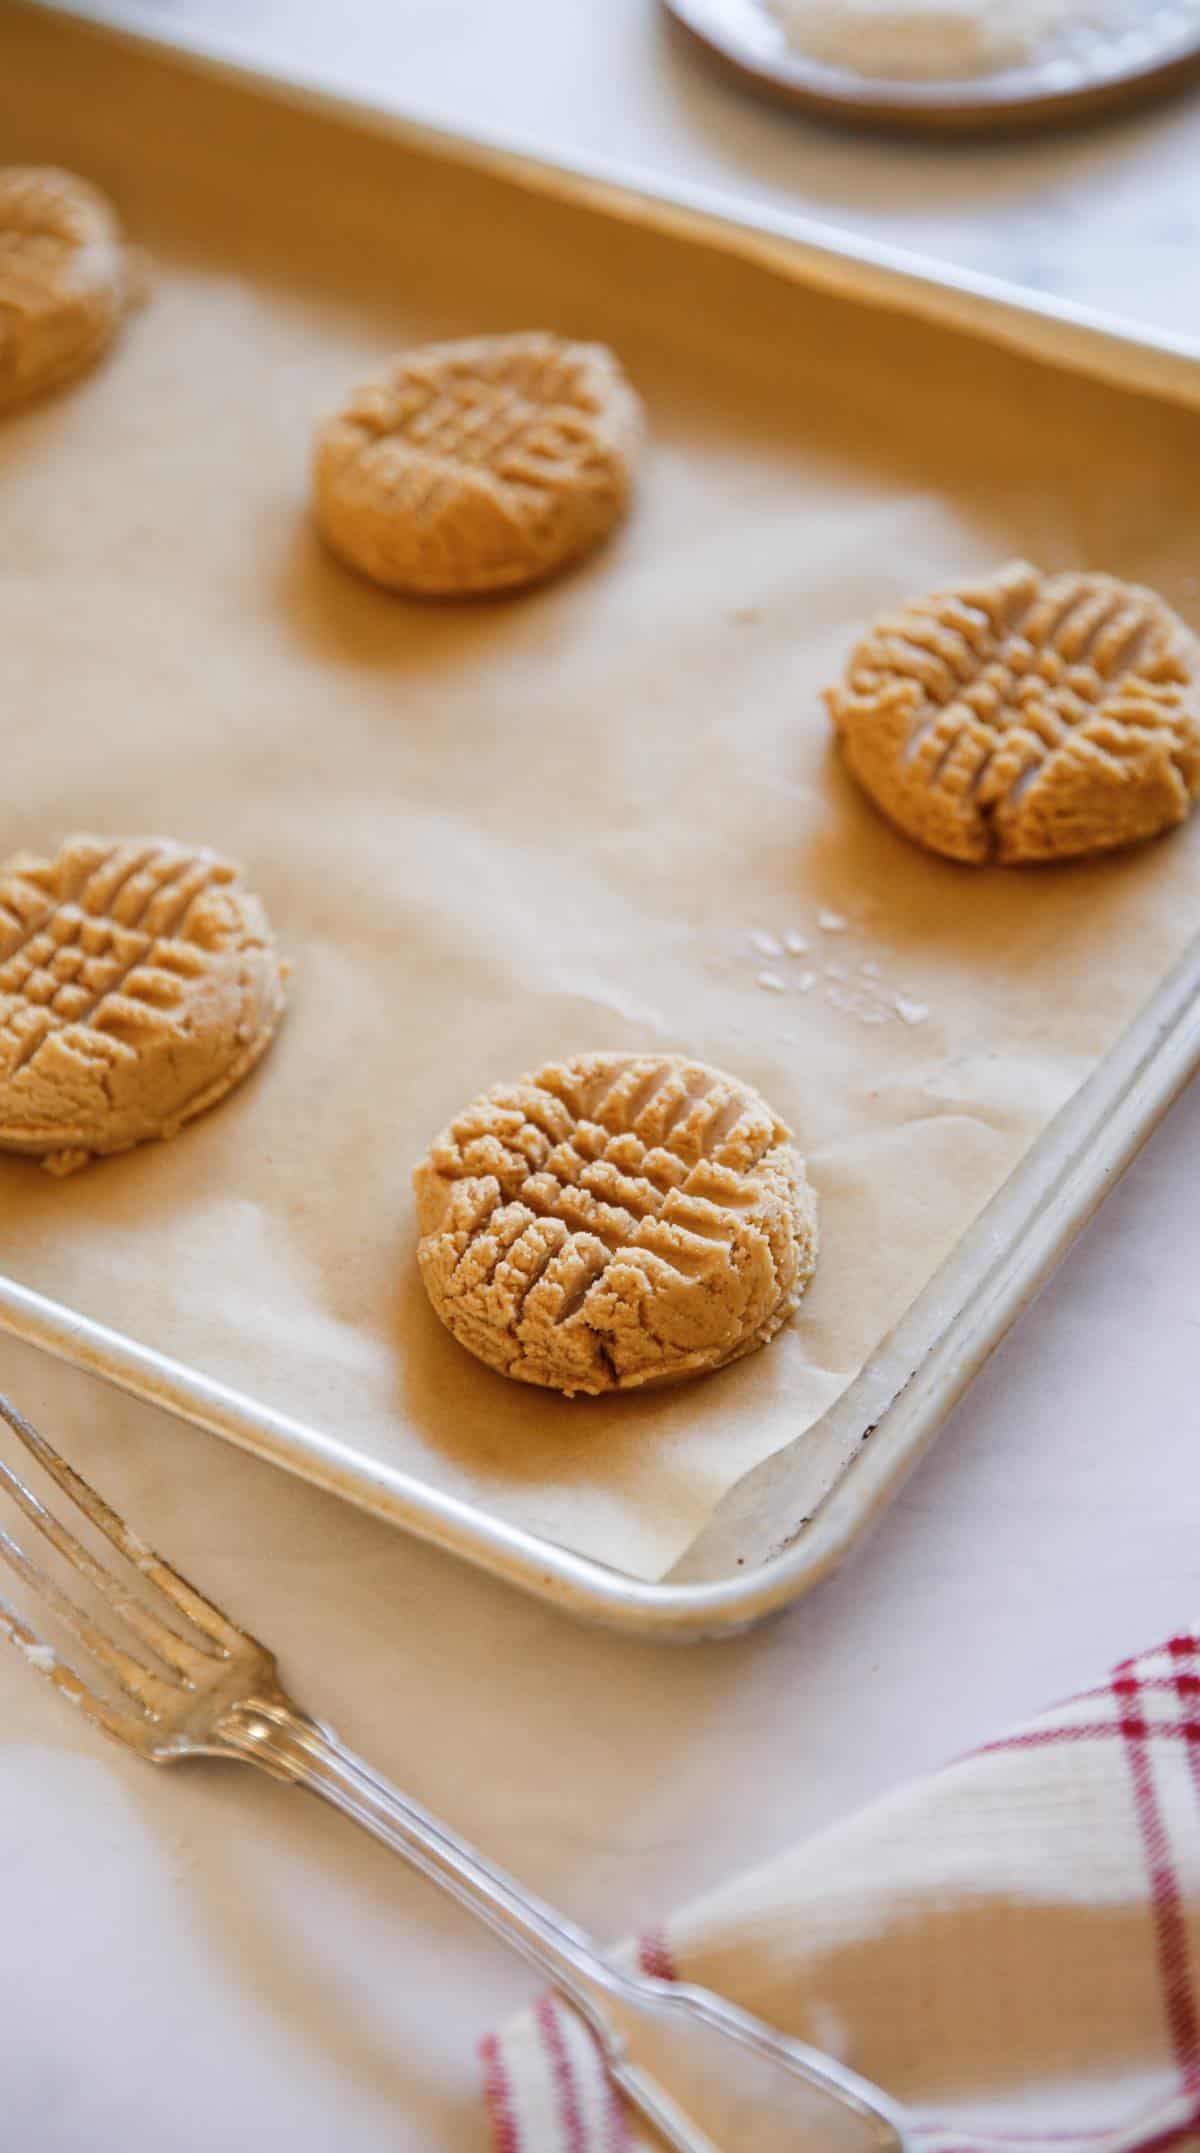 Peanut Butter Cookie Balls showing a Cross Hatch Pattern made with a fork